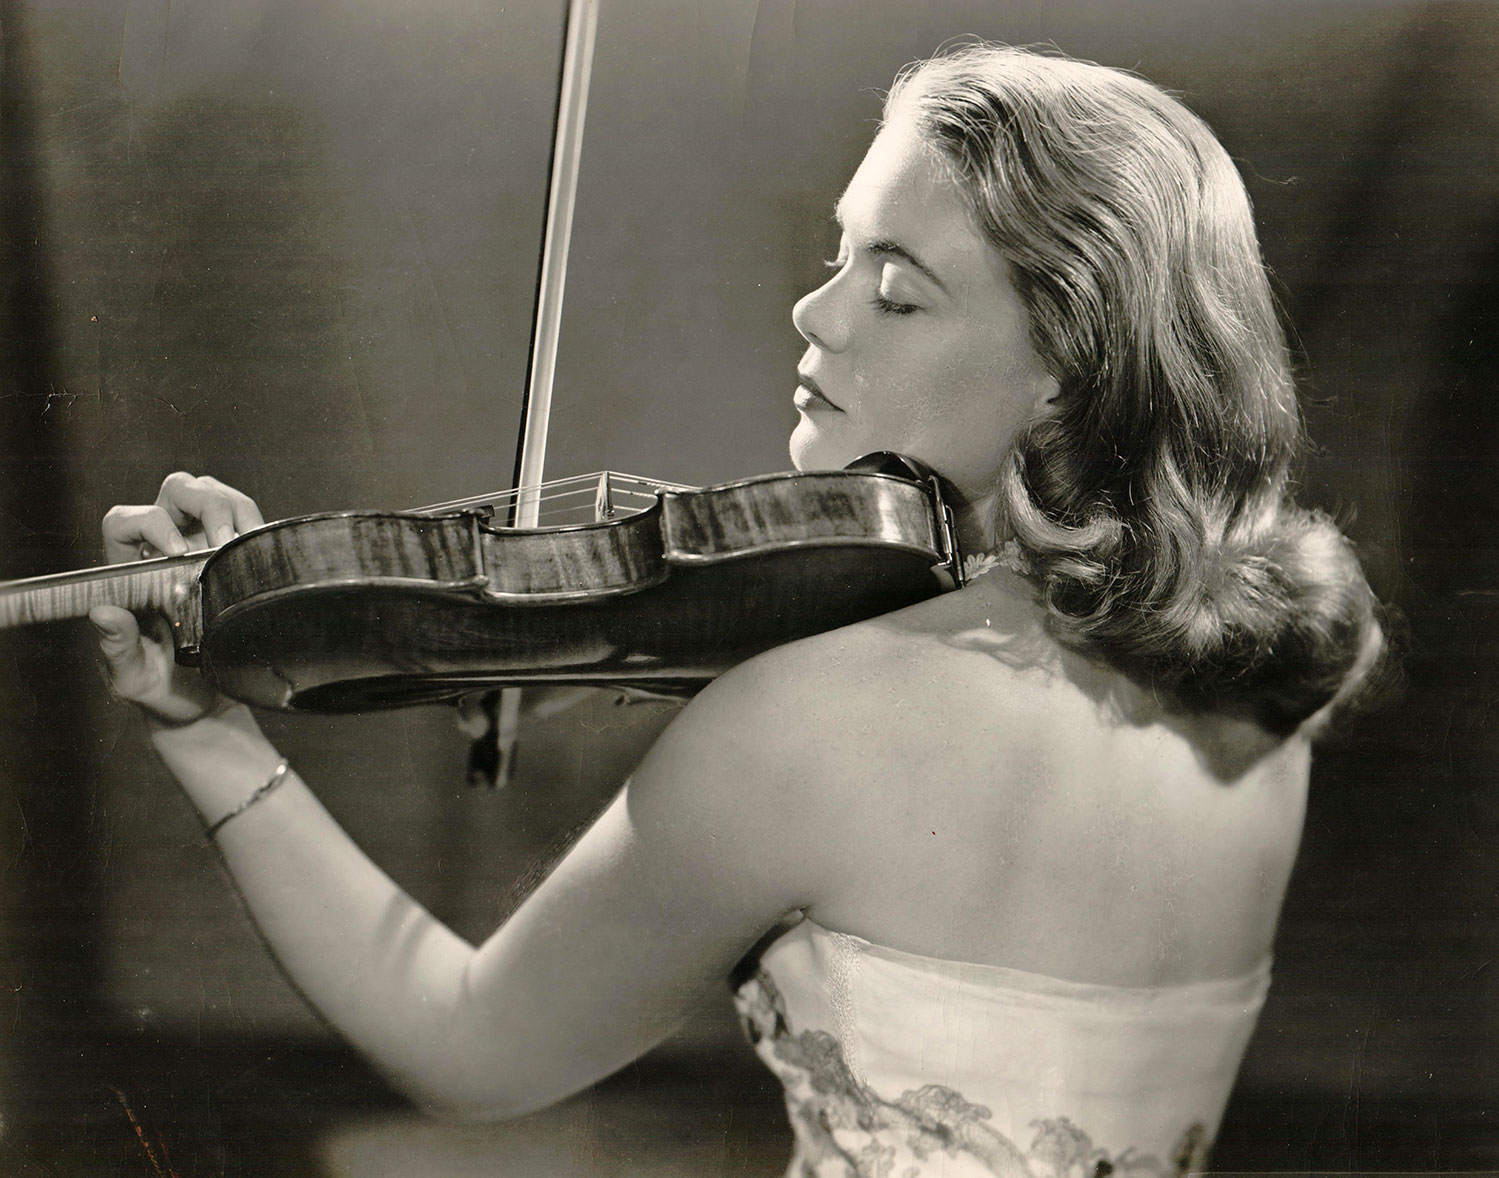 The first US female violin star has died at 92